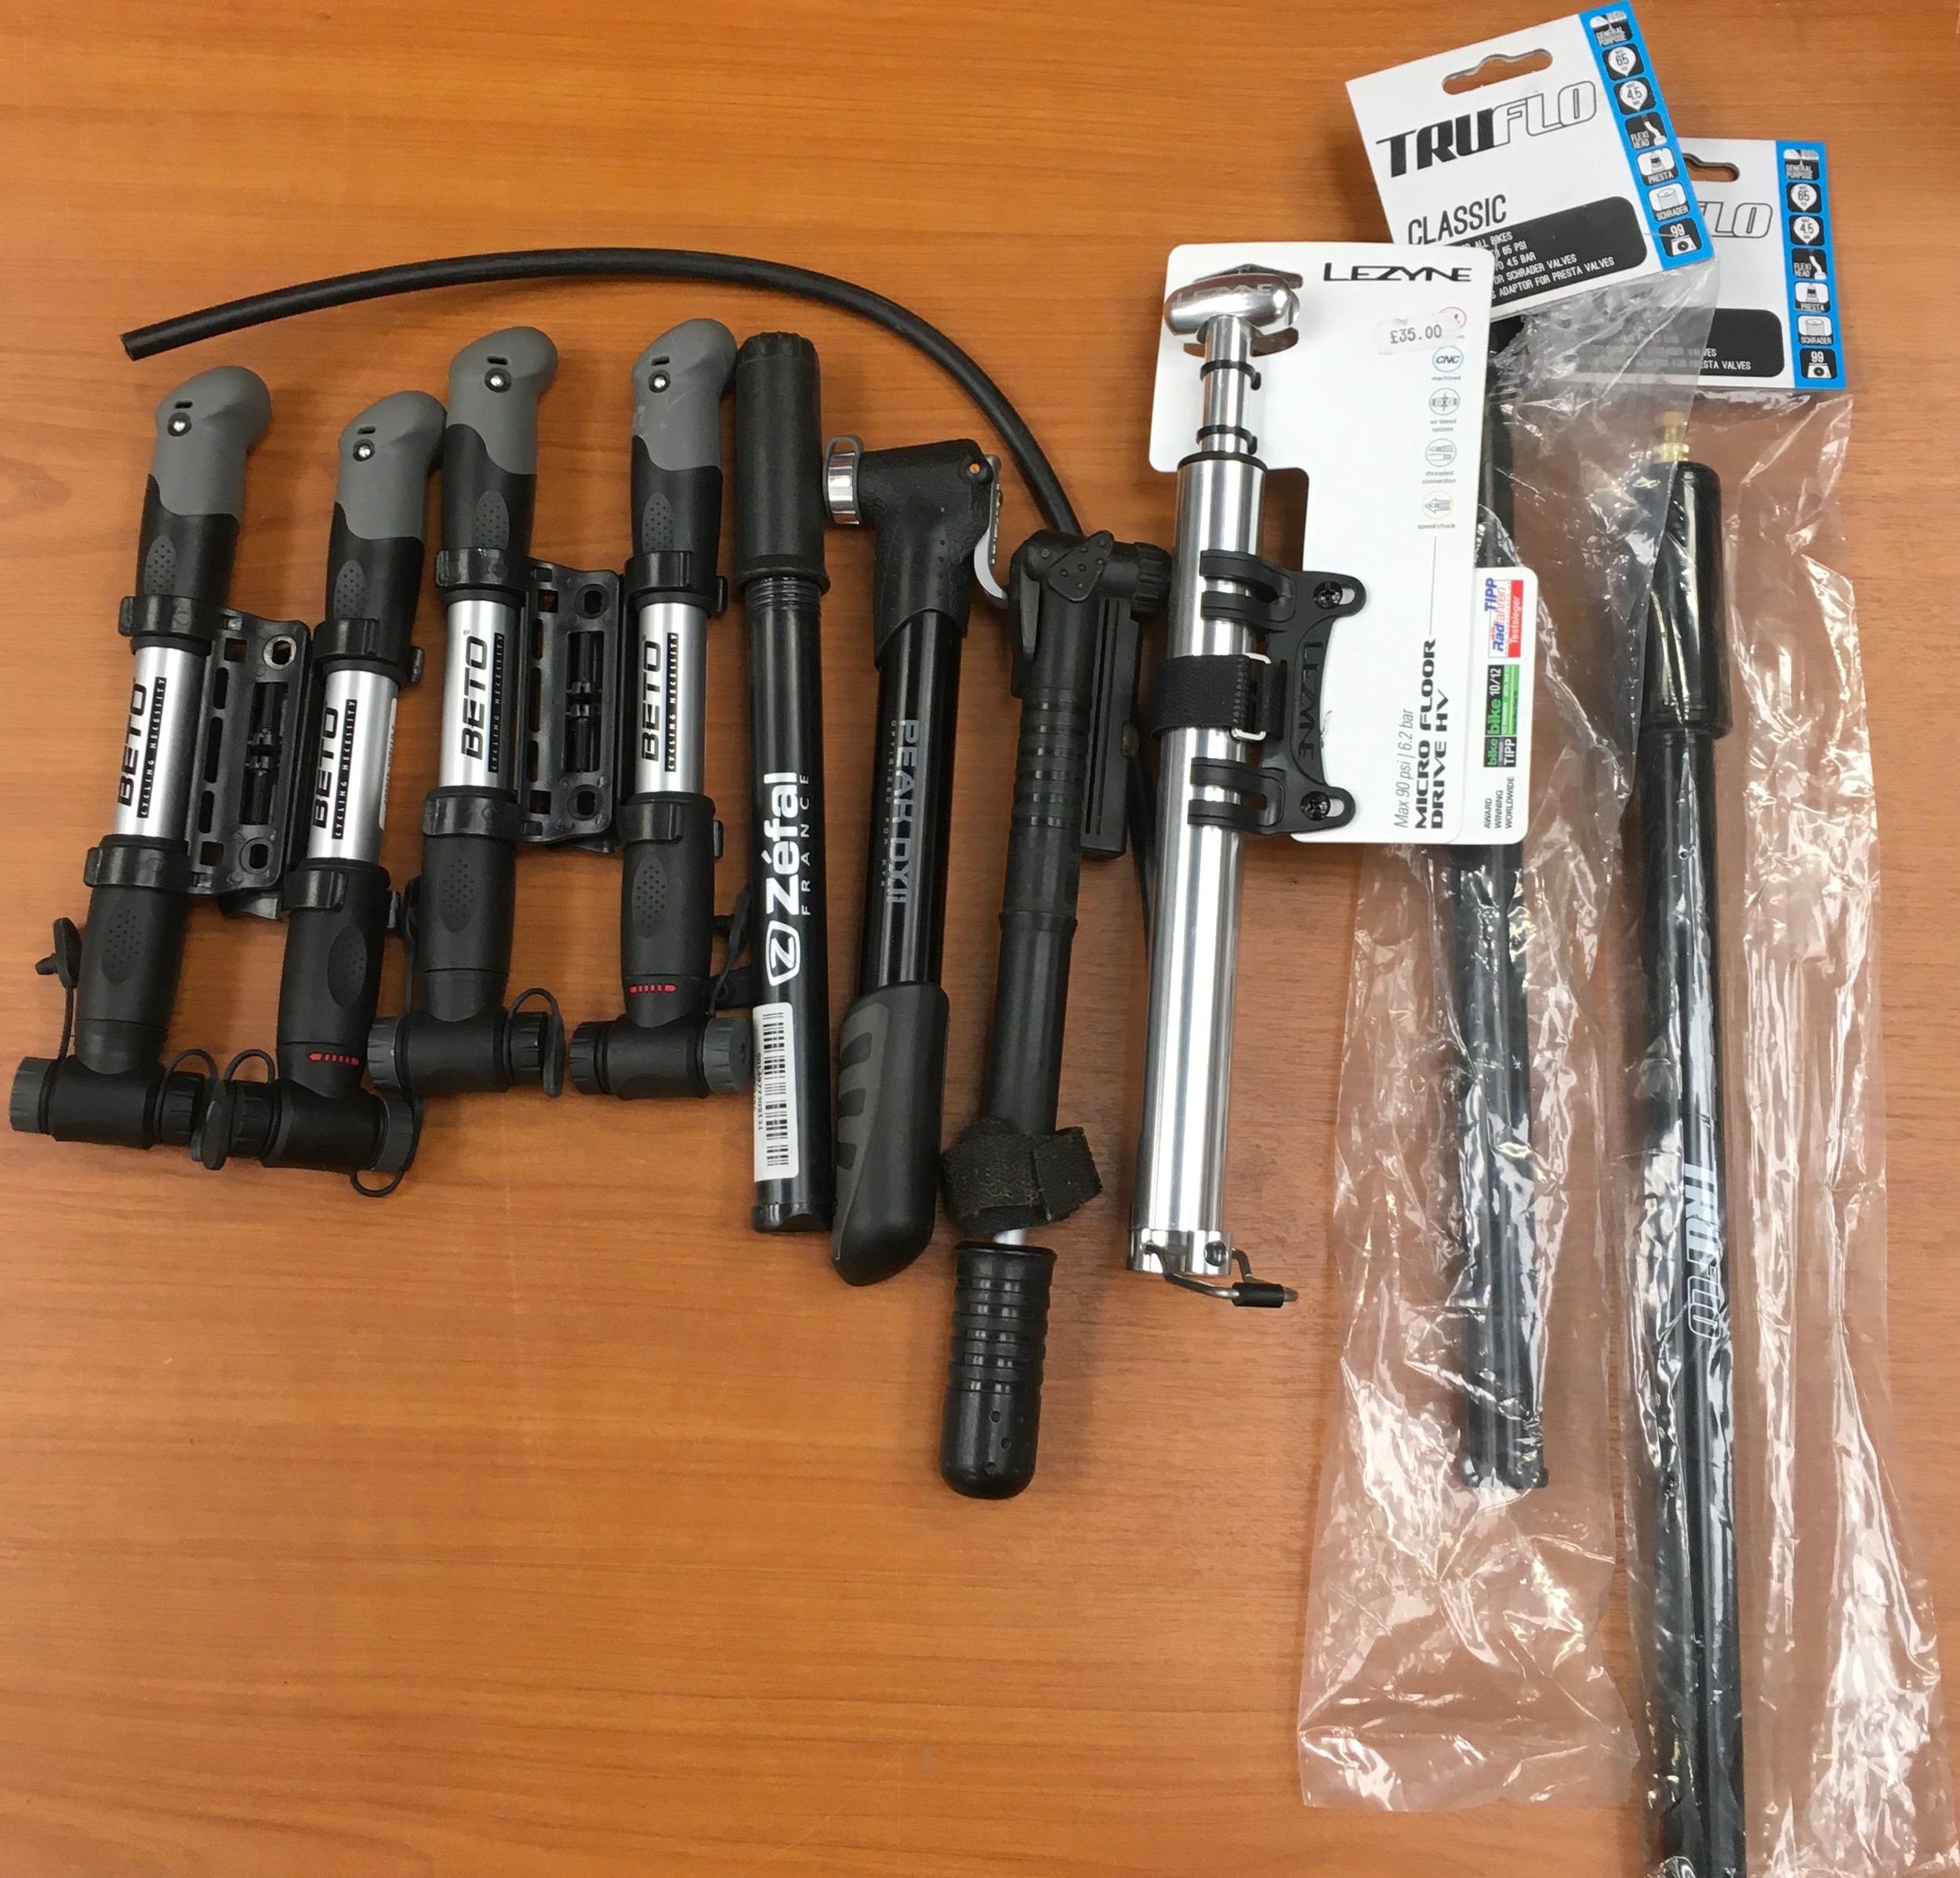 A quantity of bicycle tyre pumps. All new, some carded. 10 items in all